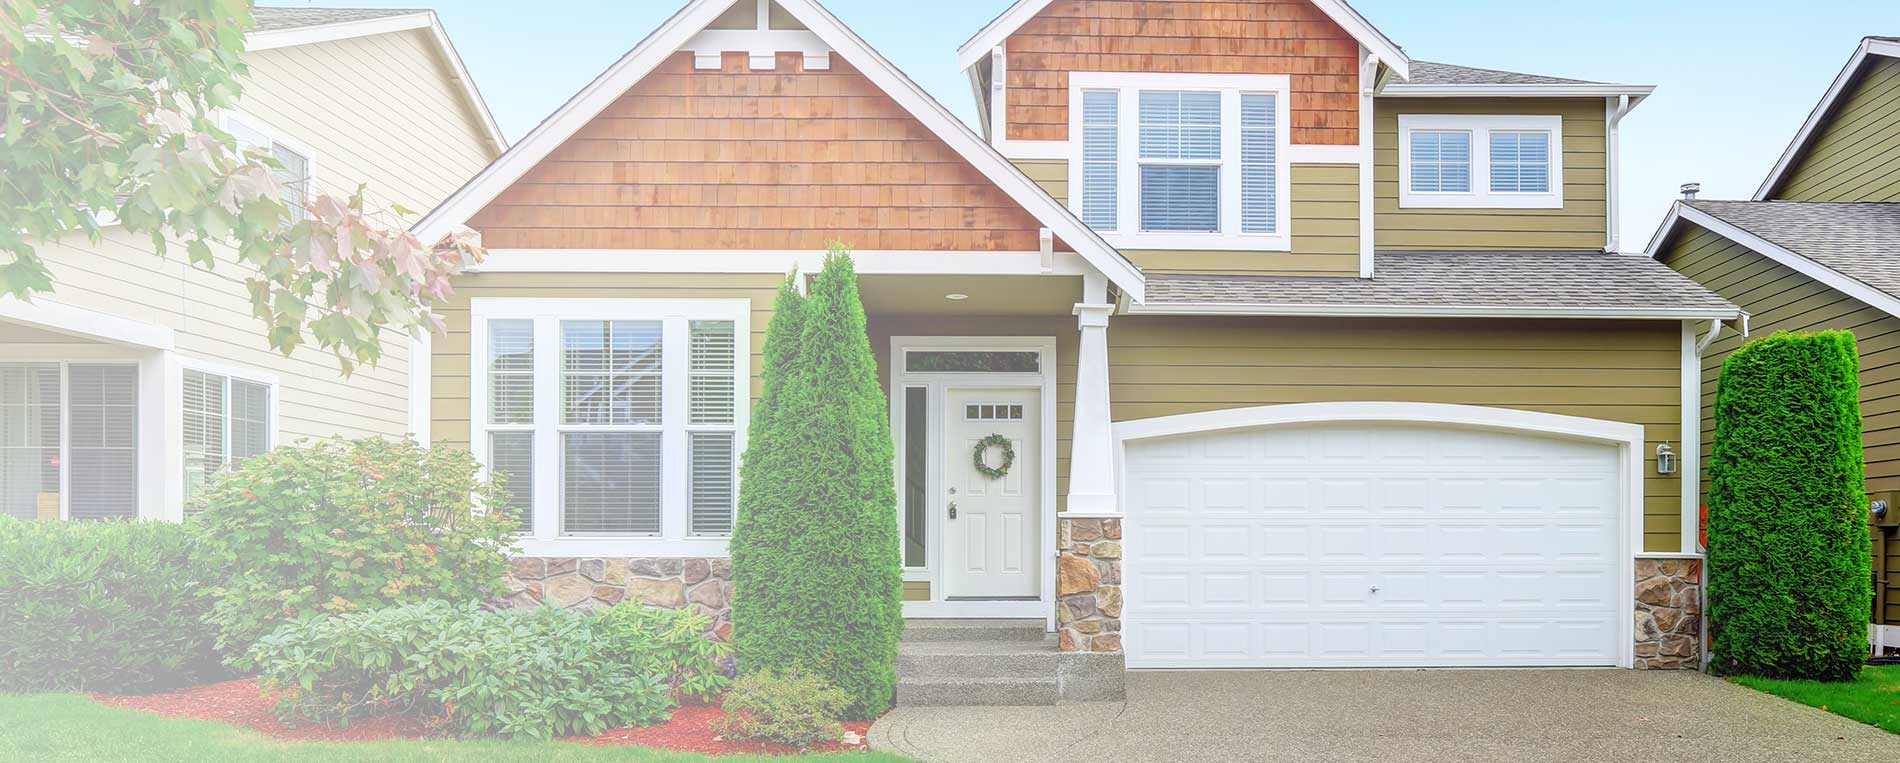 How to Avoid Garage Door Corrosion and Other Issues